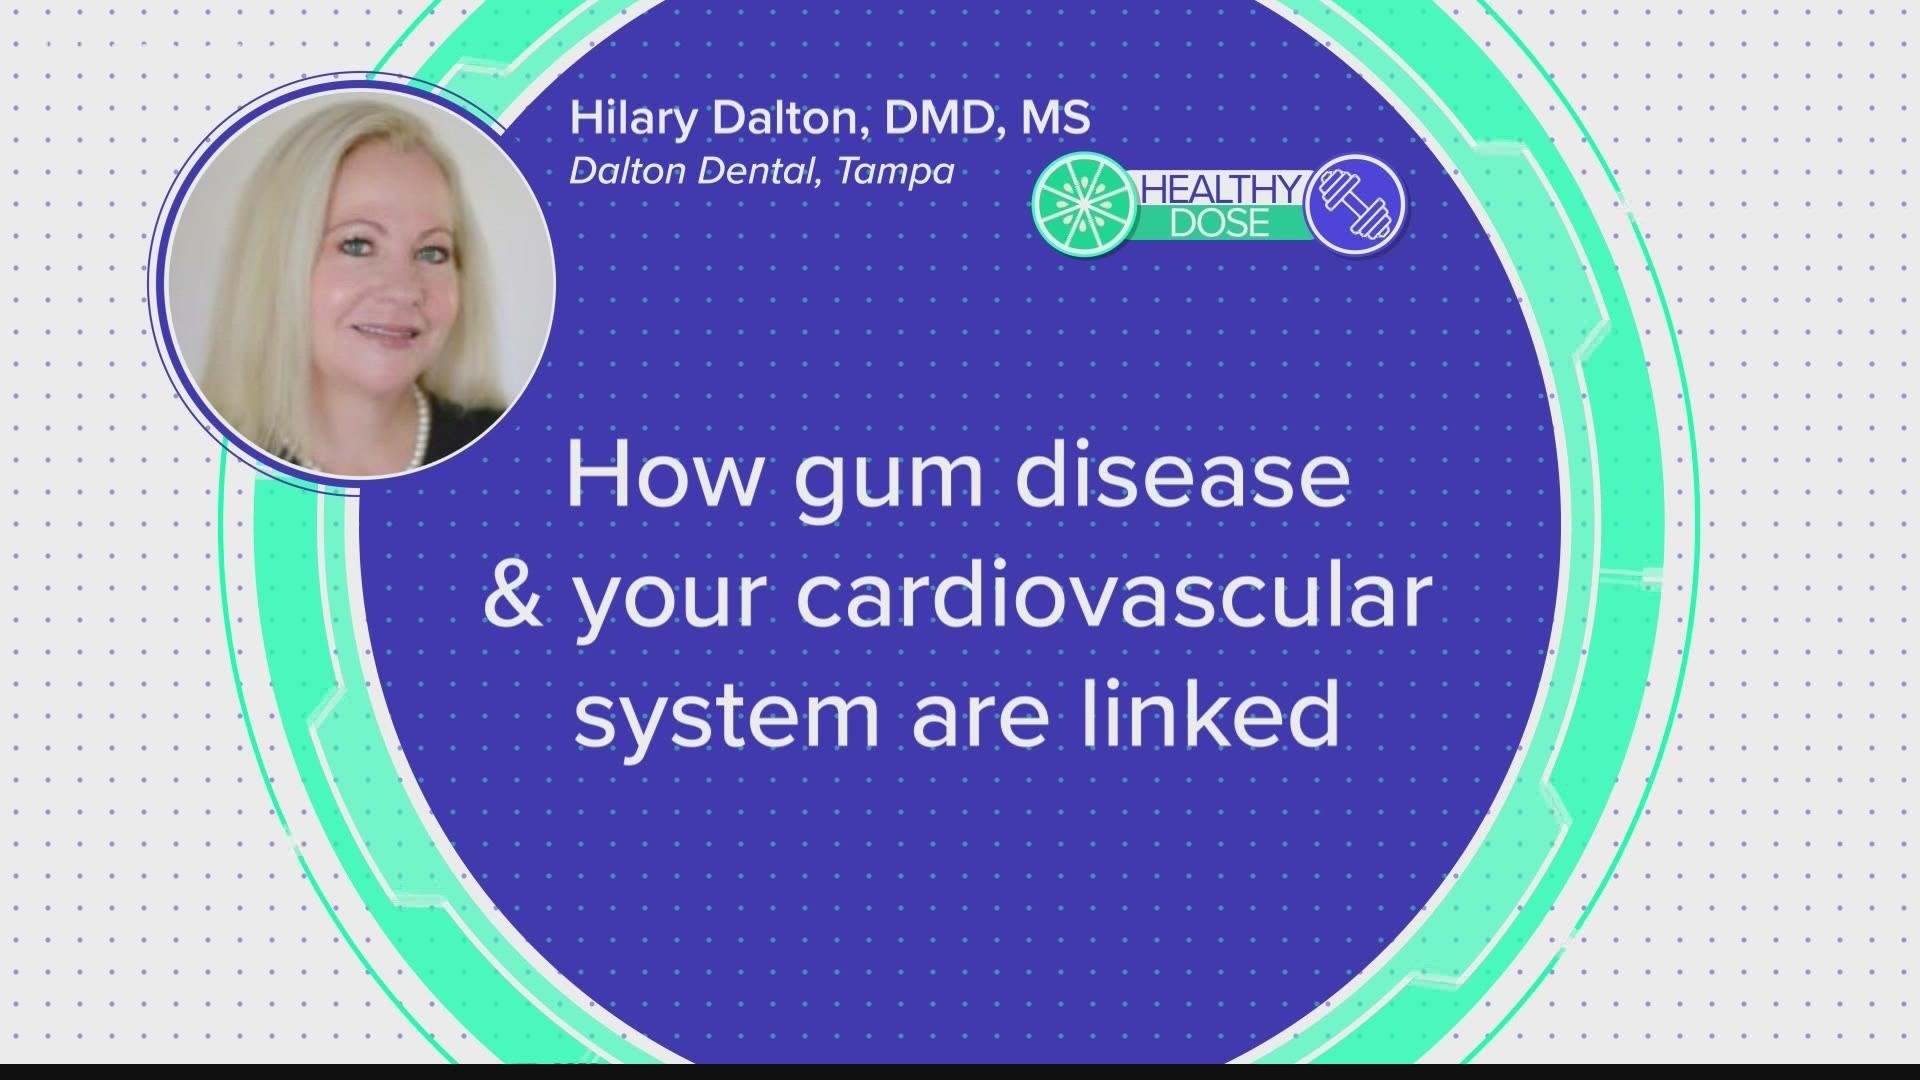 "Gum disease, or periodontitis, was significantly more common in first-time heart attack patients and that regular dental screenings can help prevent them."